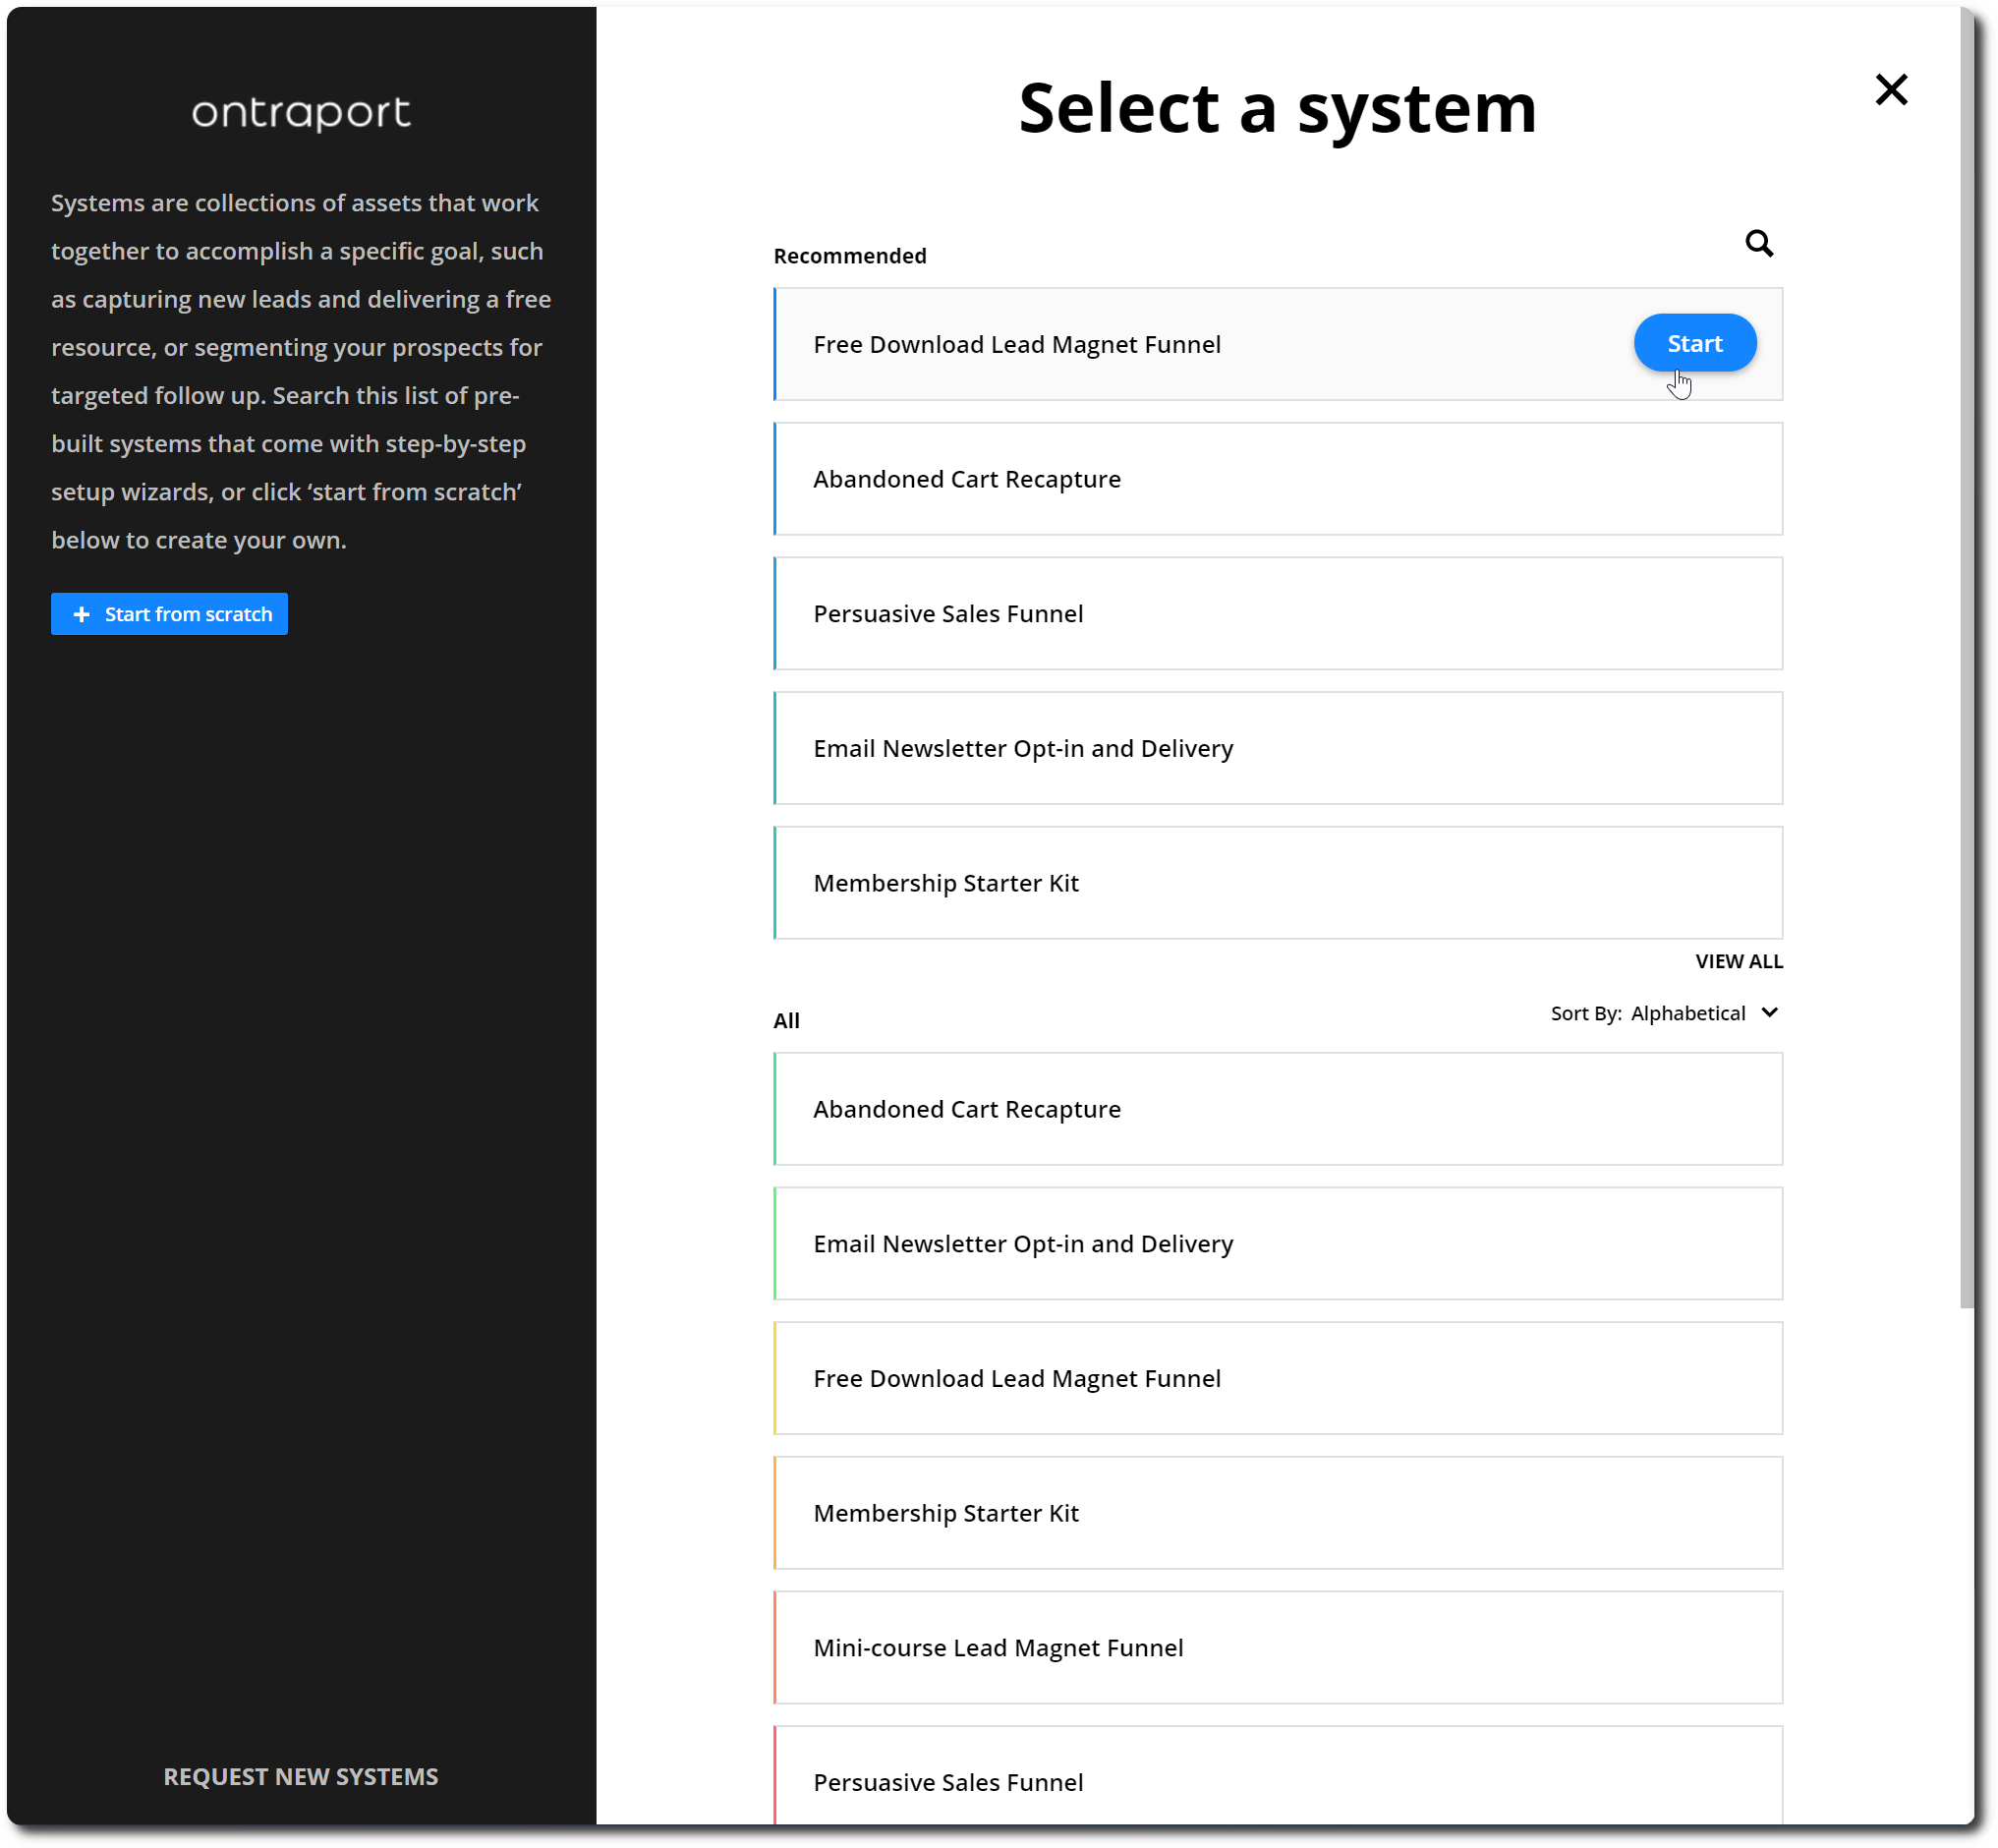 Select a system page